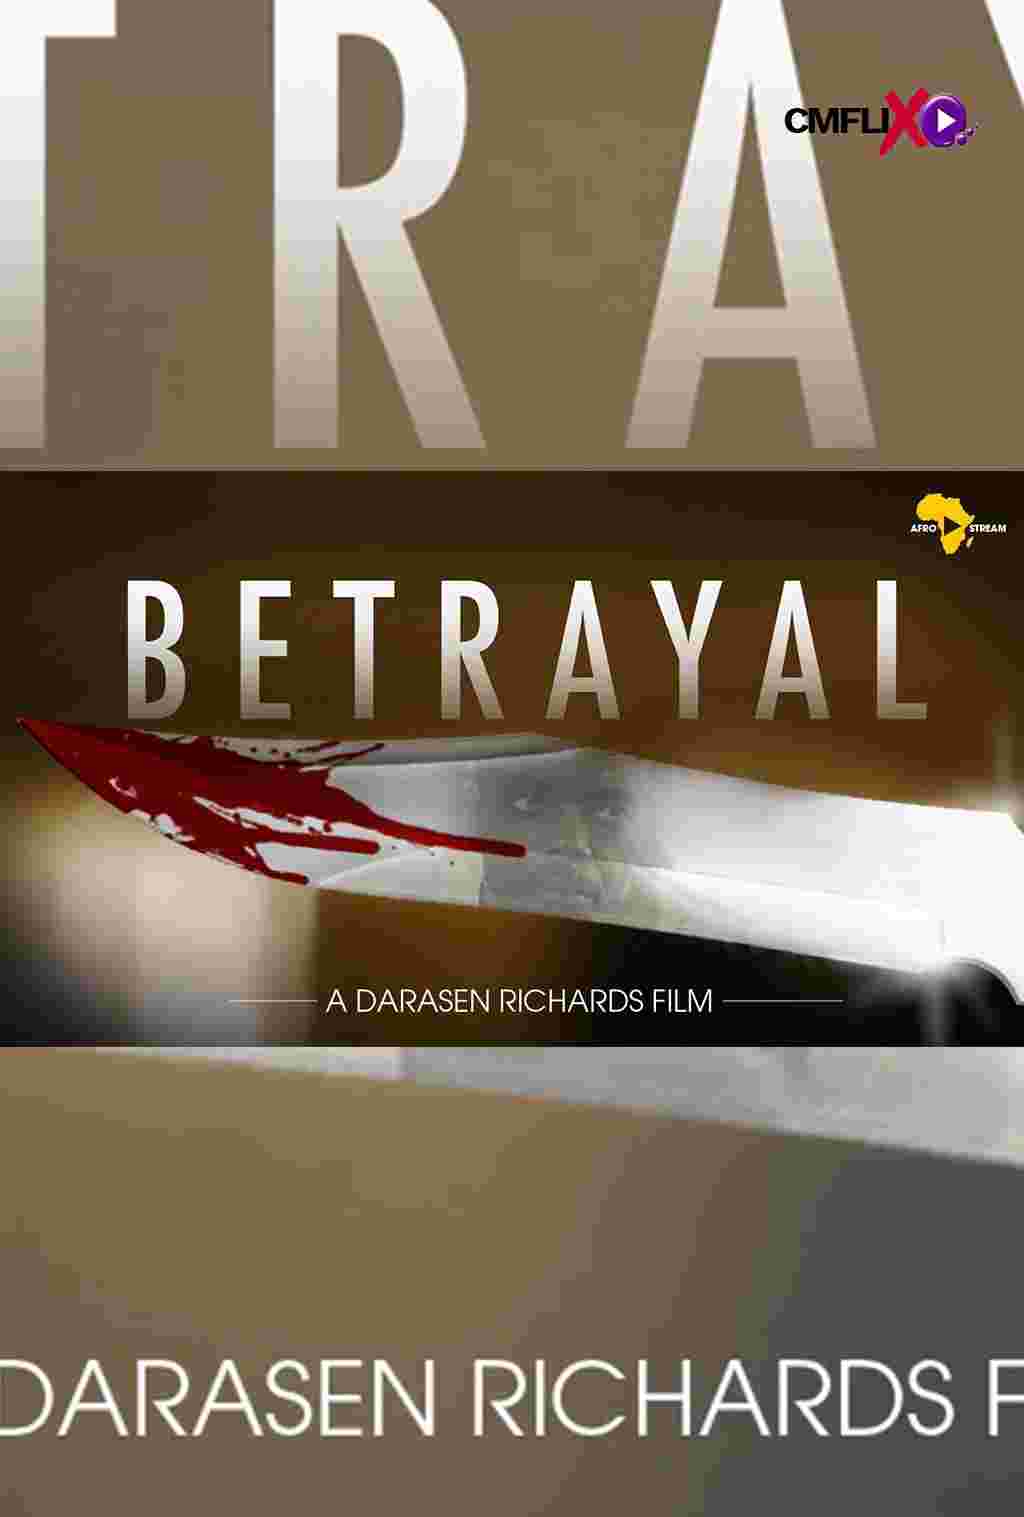 BETRAYAL - THE REVENGE OF AN ANGRY WIFE